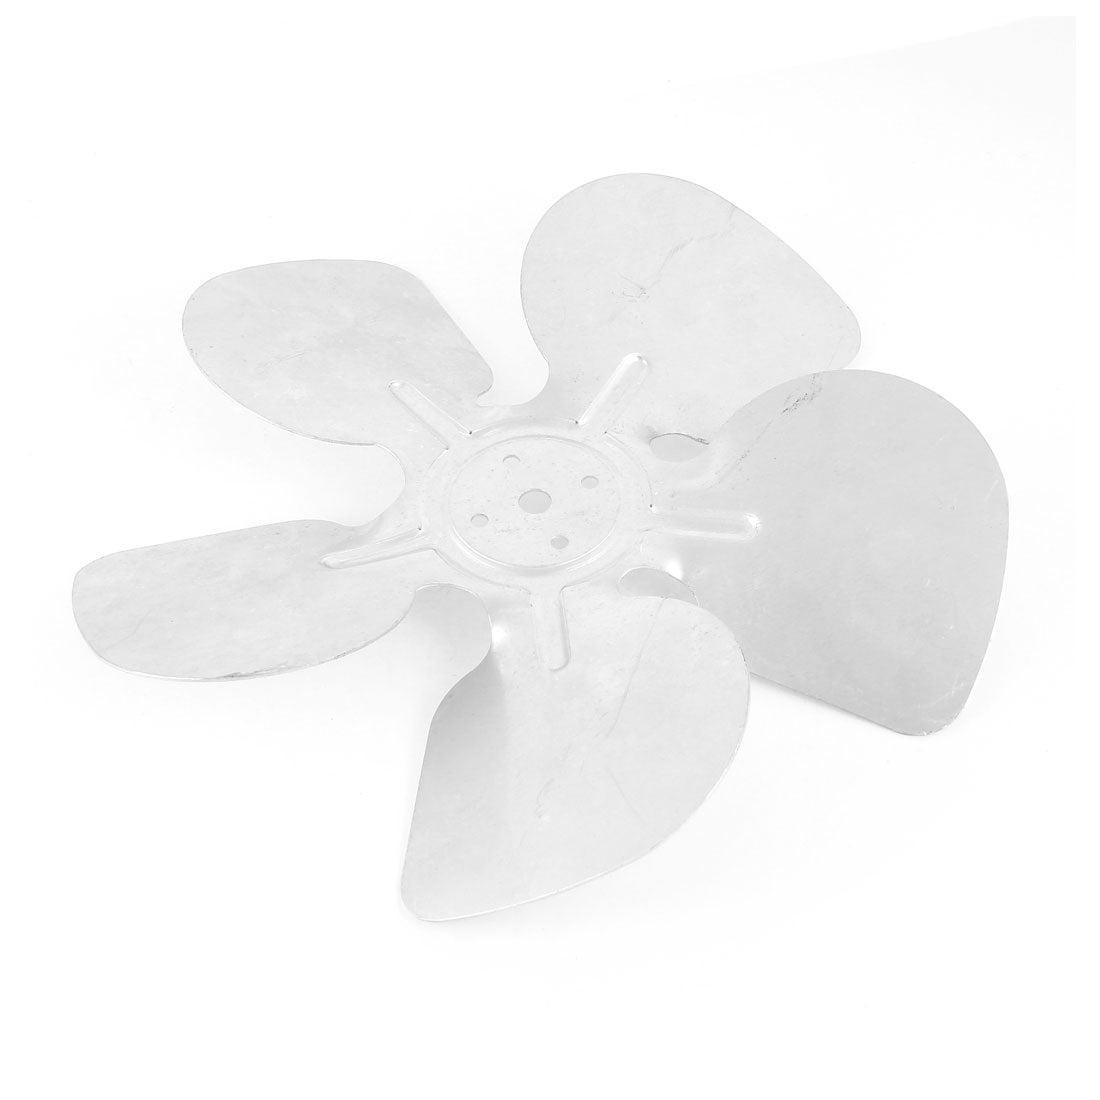 uxcell Uxcell 8" White Shaded Pole Motor Aluminum Hubless Fan Vanes Replacement